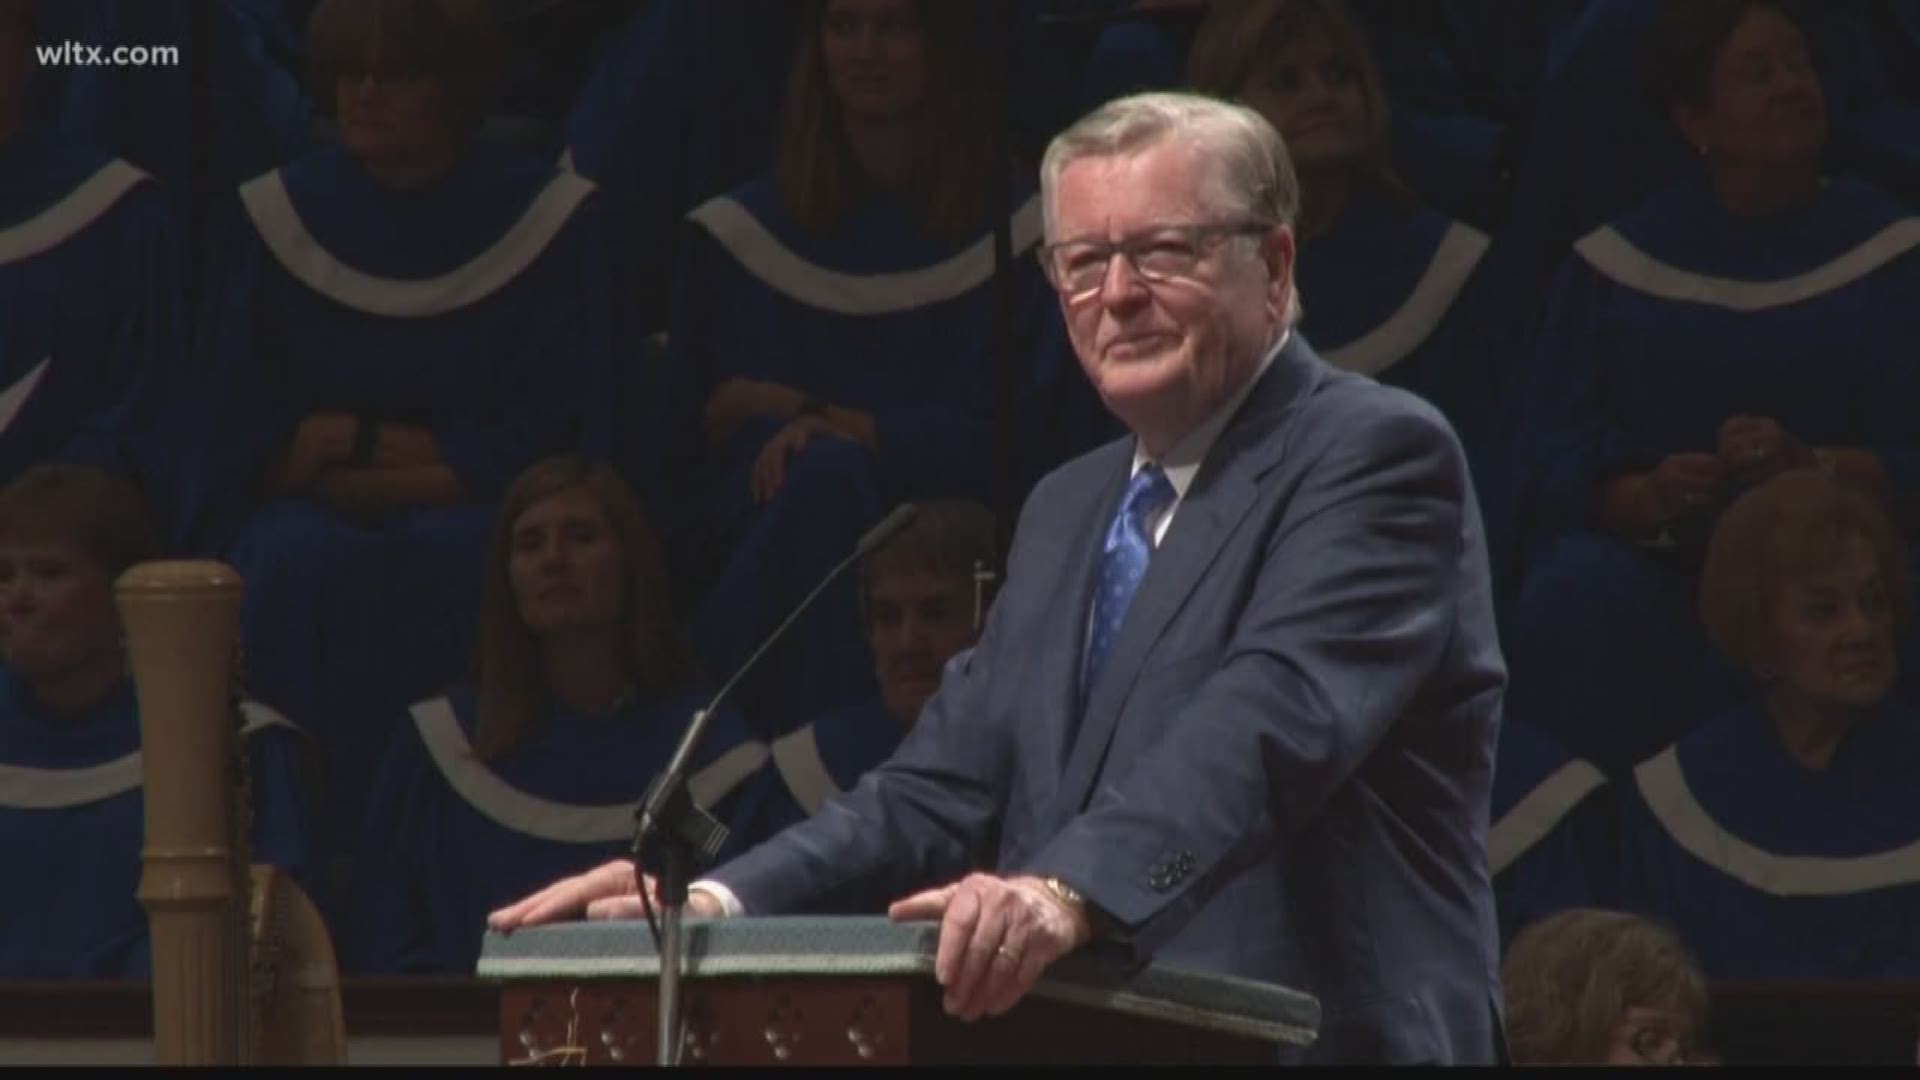 Hundreds packed into First Baptist Church in Columbia to honor Dr. Wendell Estep, who held his final service after 30-plus years of ministry.